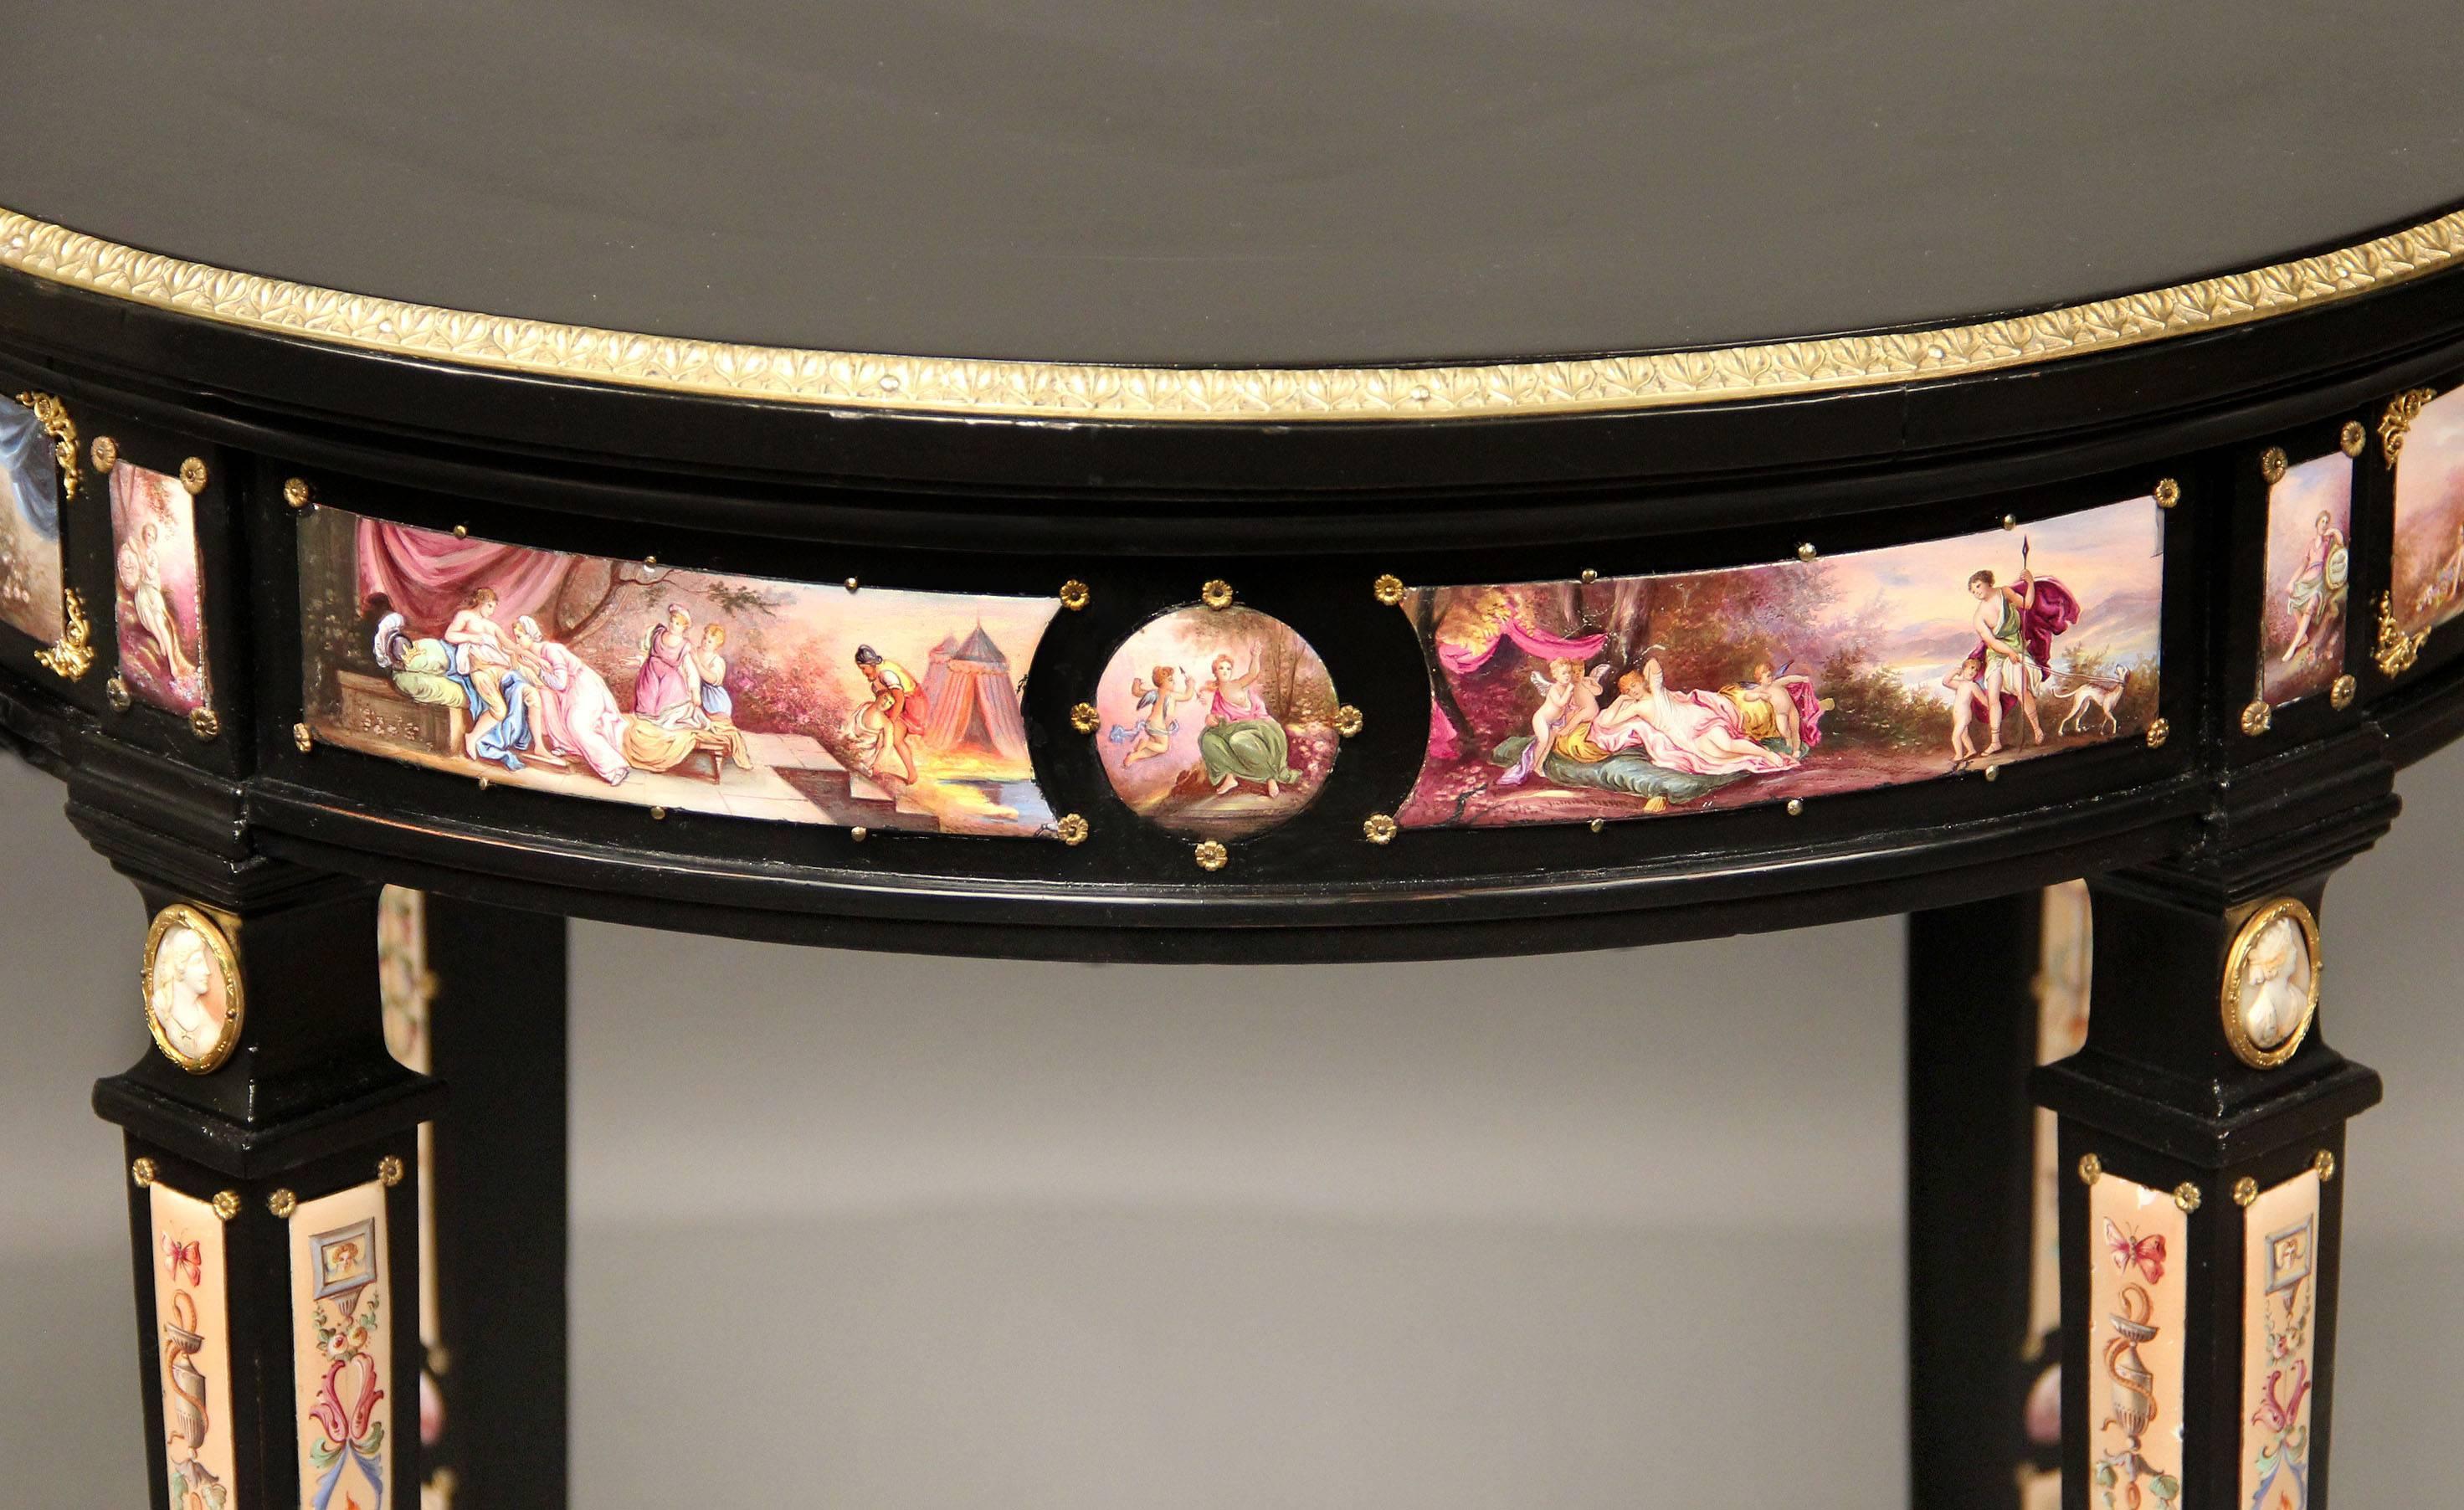 A rare and special late 19th century Louis XVI style gilt bronze and Viennese enamel mounted lacquered lamp table.

A lacquered wood top above a single center drawer, mounted with numerous enamel plaques depicting figural and mythological scenes.